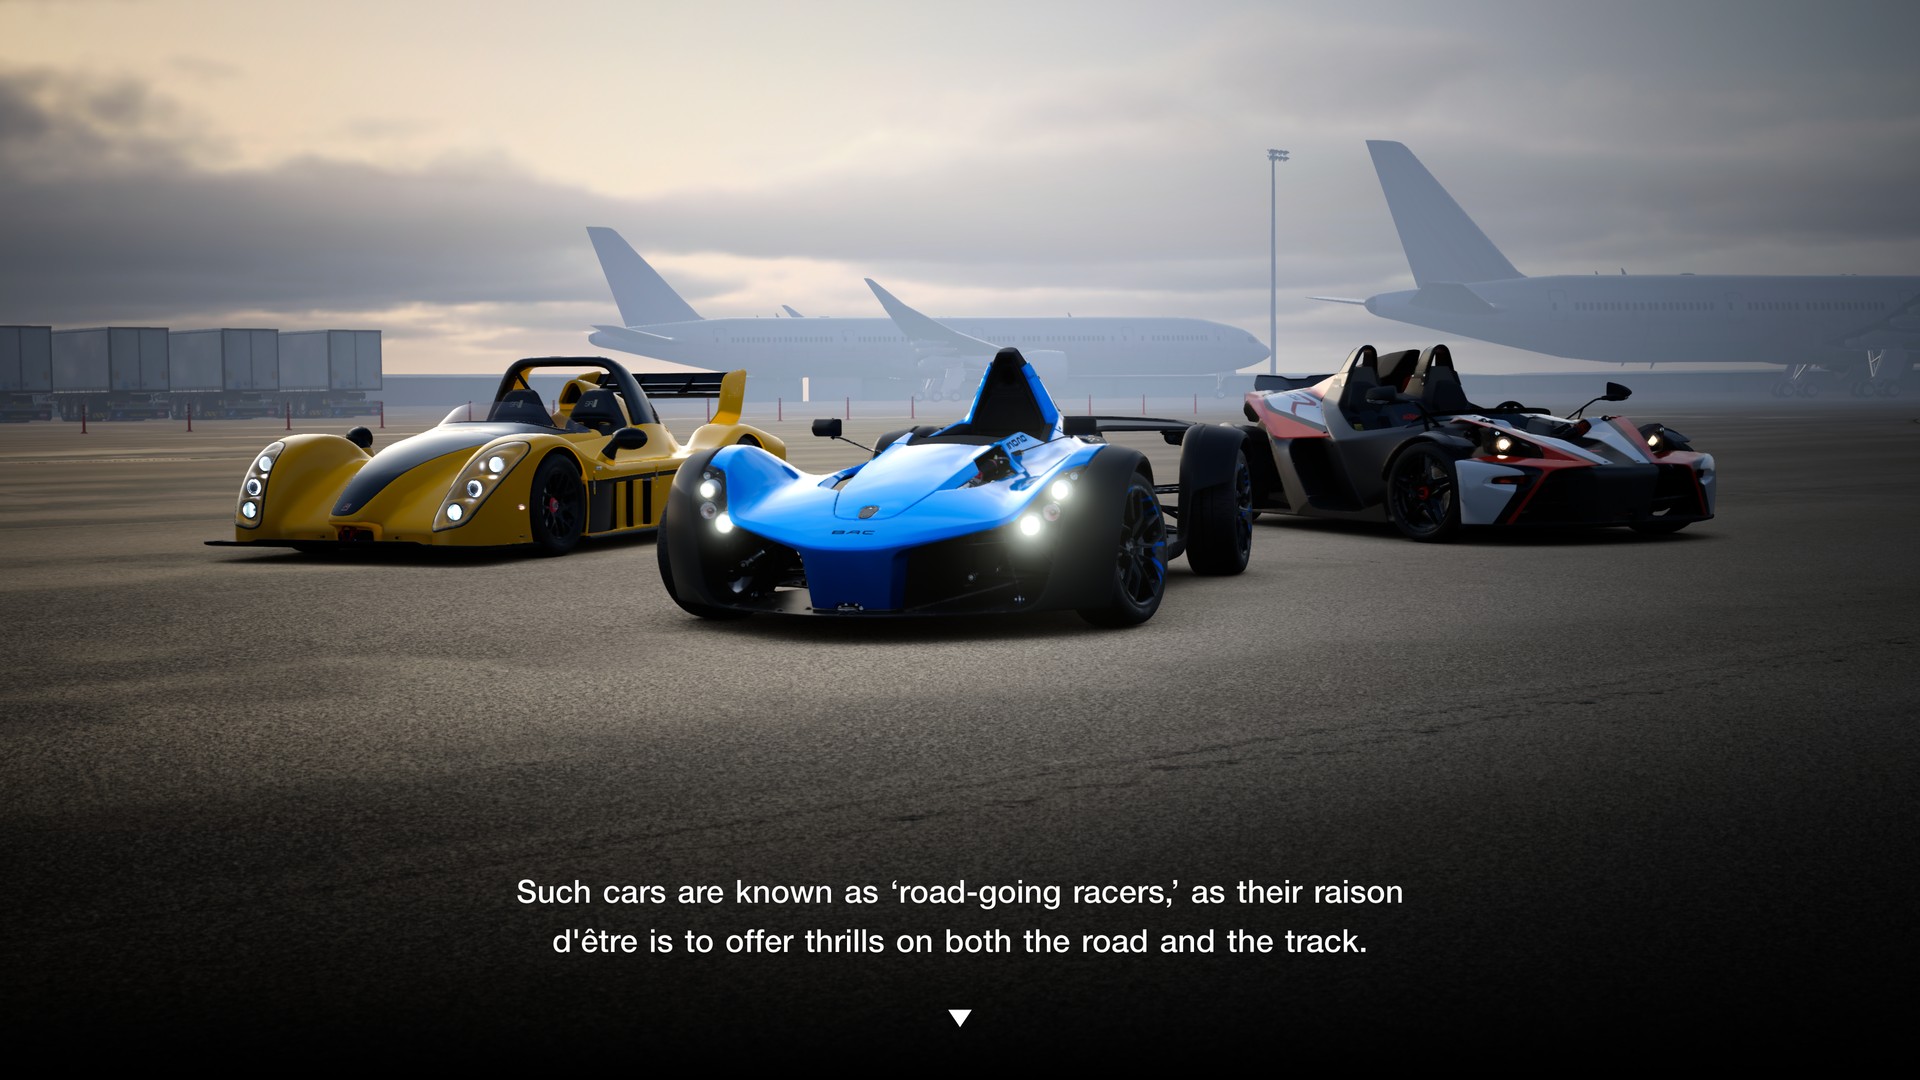 Gran Turismo 7 update for PS5 adds four cars, but locks two for future